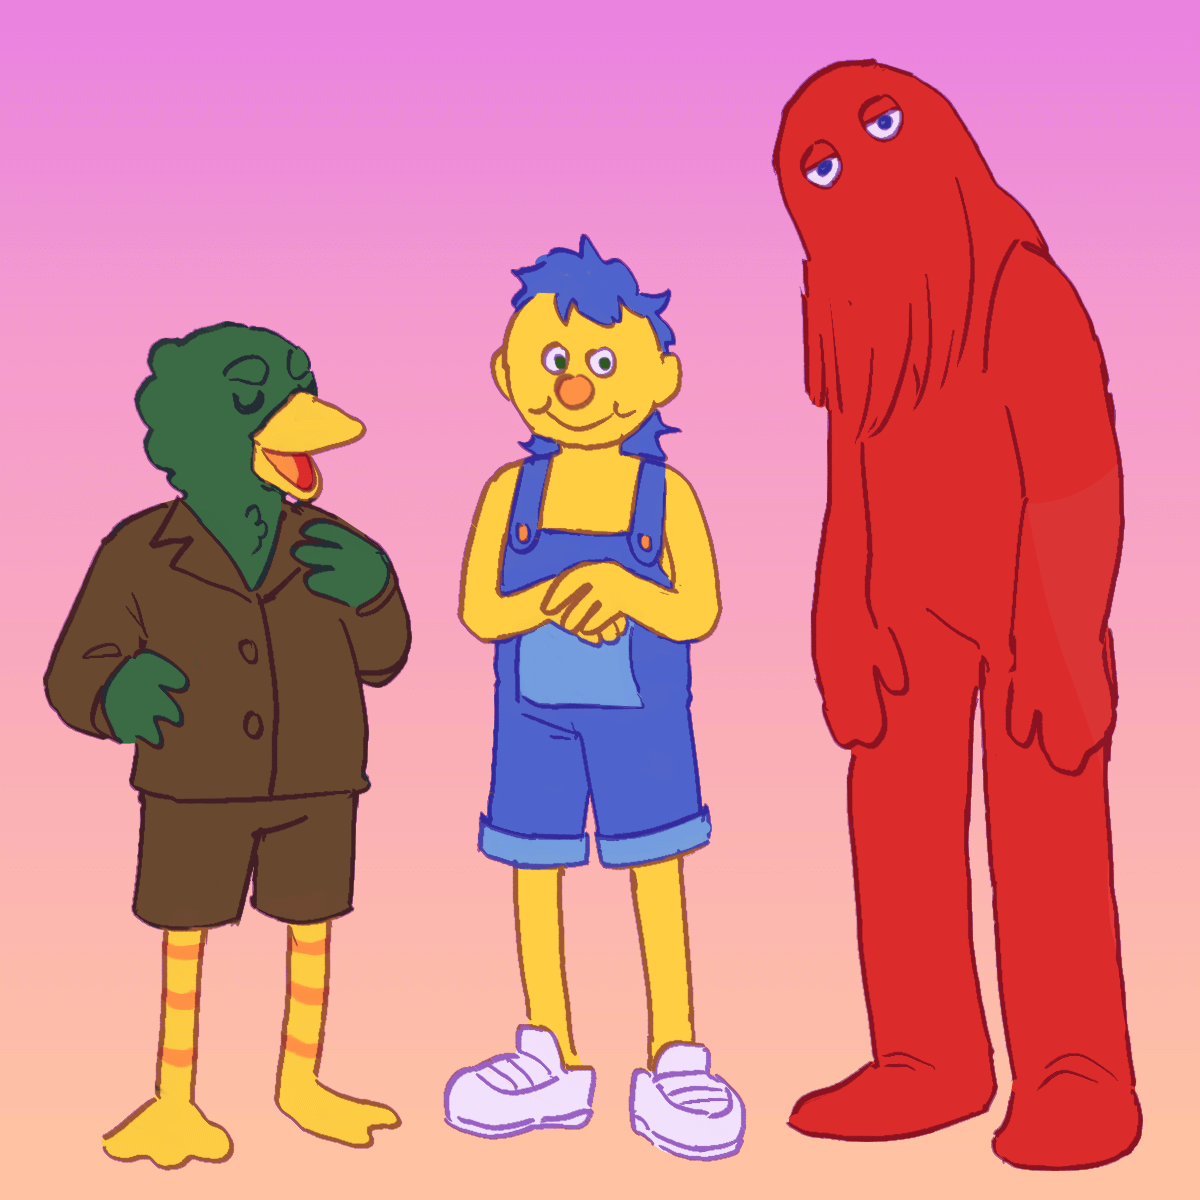 a drawing of duck, yellow guy, and red guy from don't hug me I'm scared.
		they are simply standing next to each other in front of a gradient background